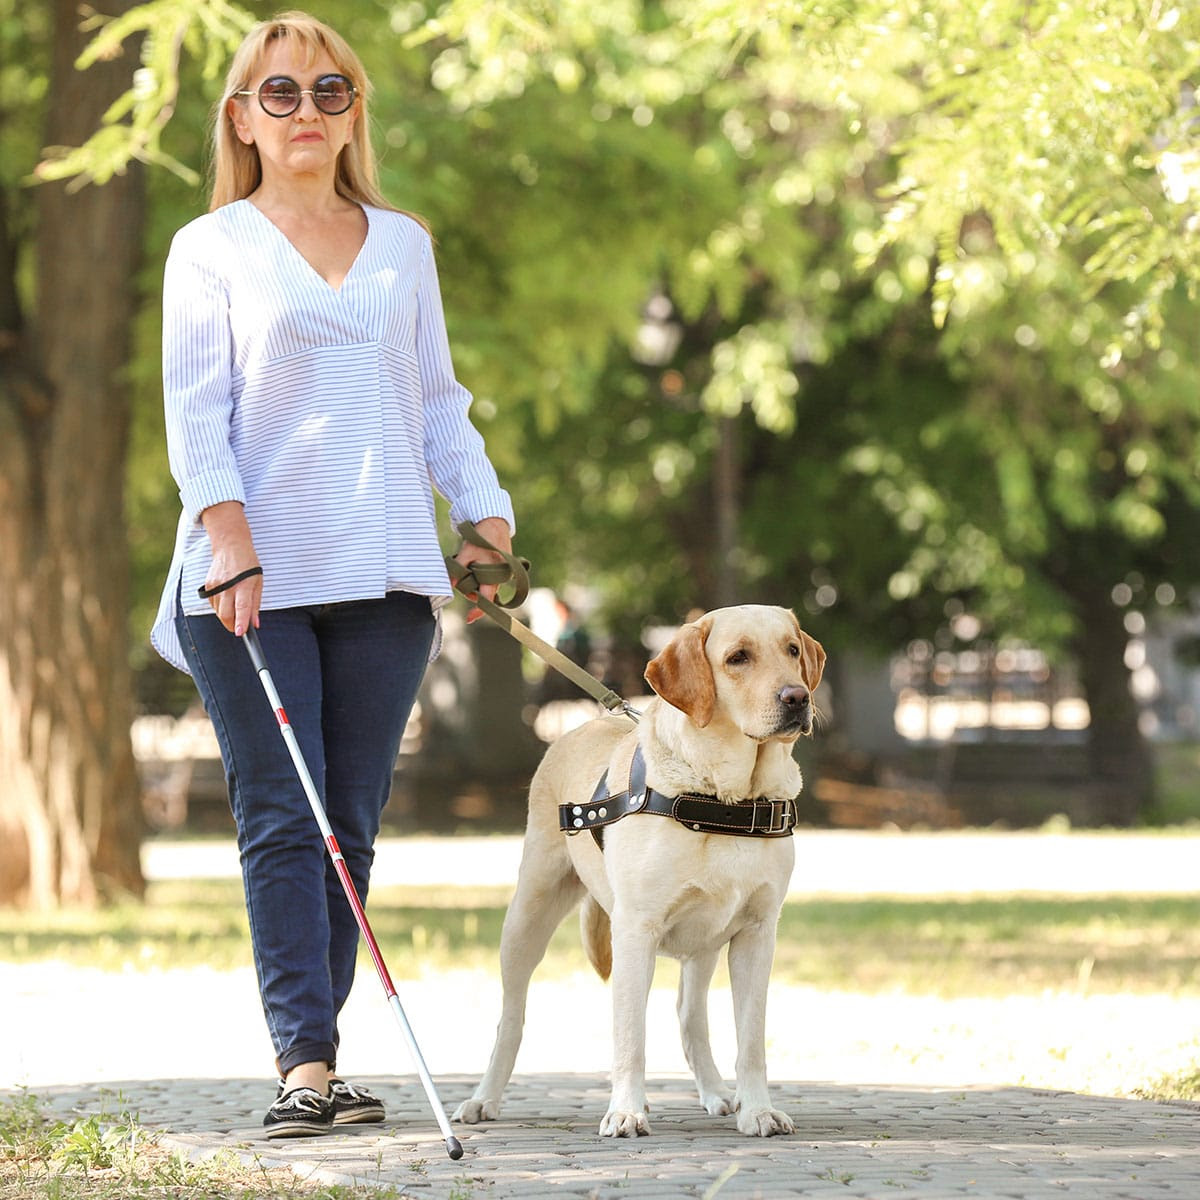 A blind woman taking a walk with her guide dog.